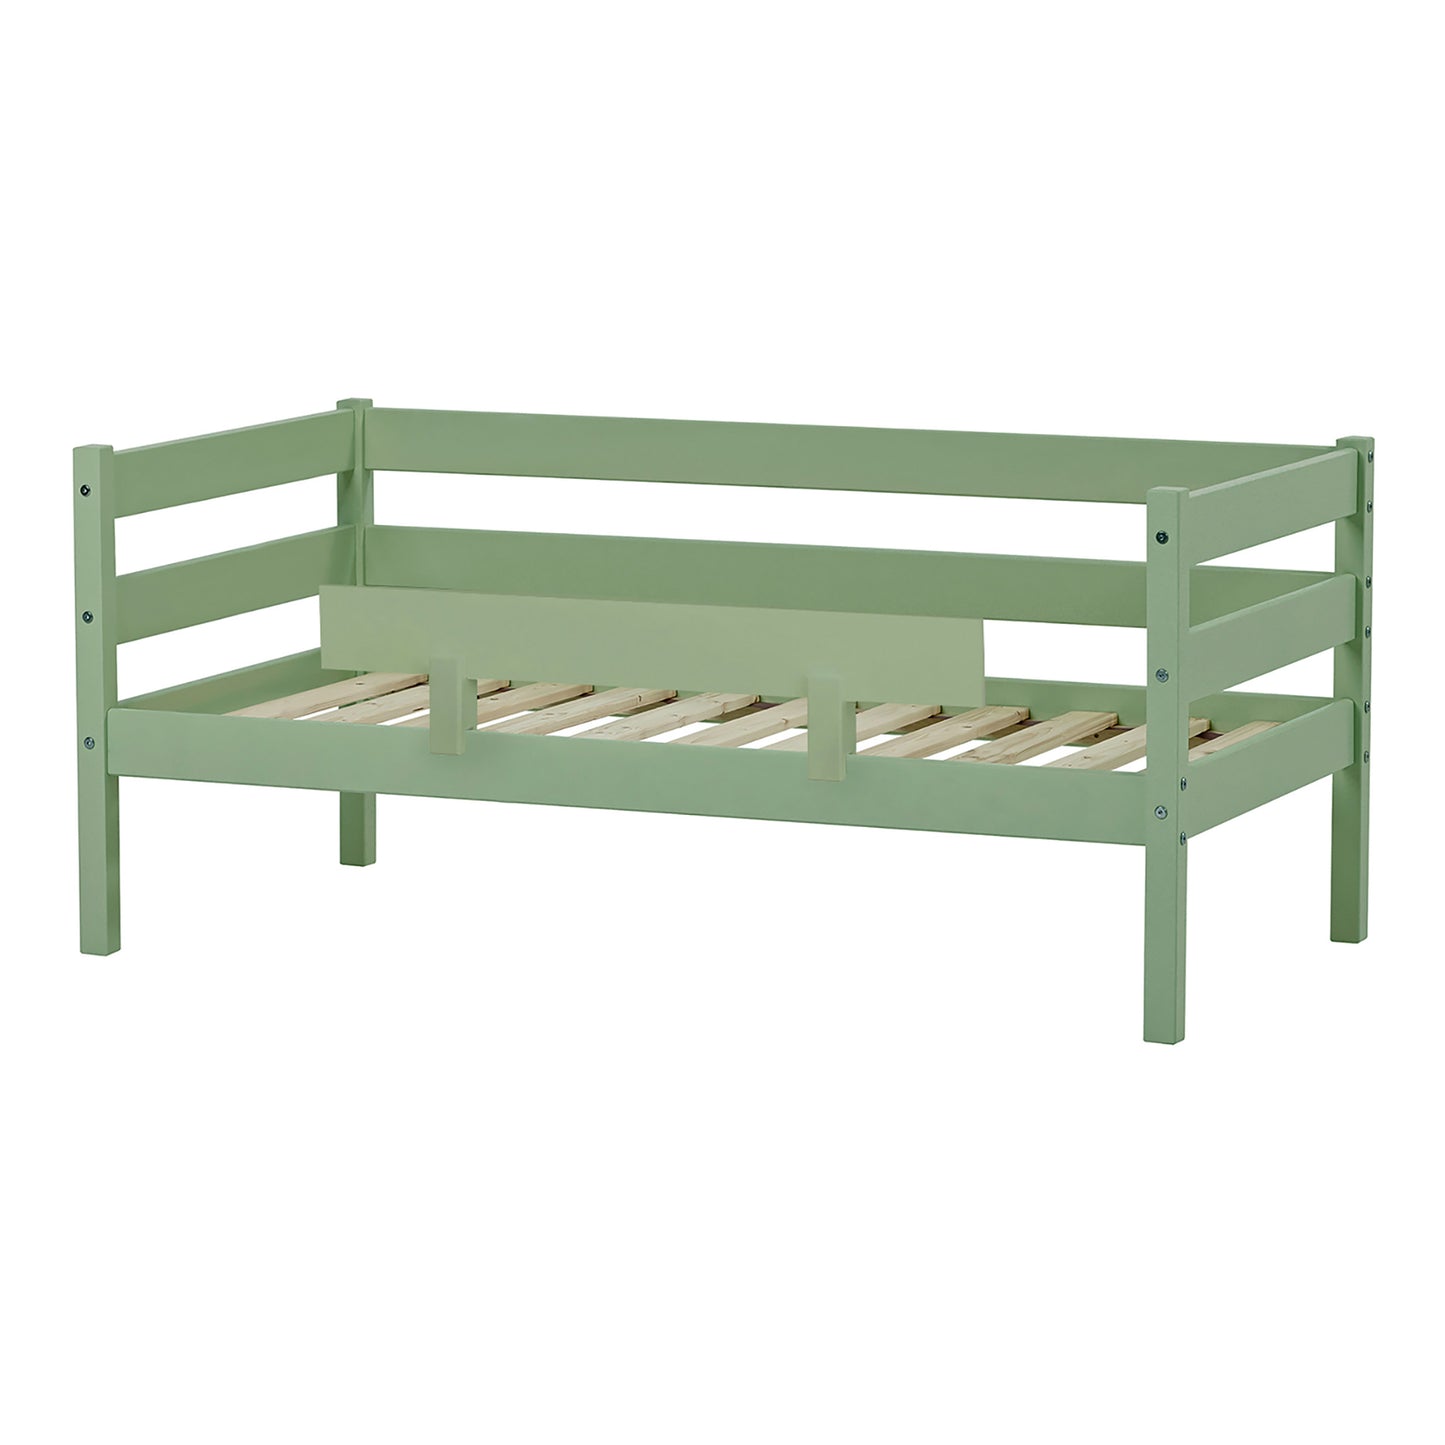 ECO Comfort junior bed with safety rail